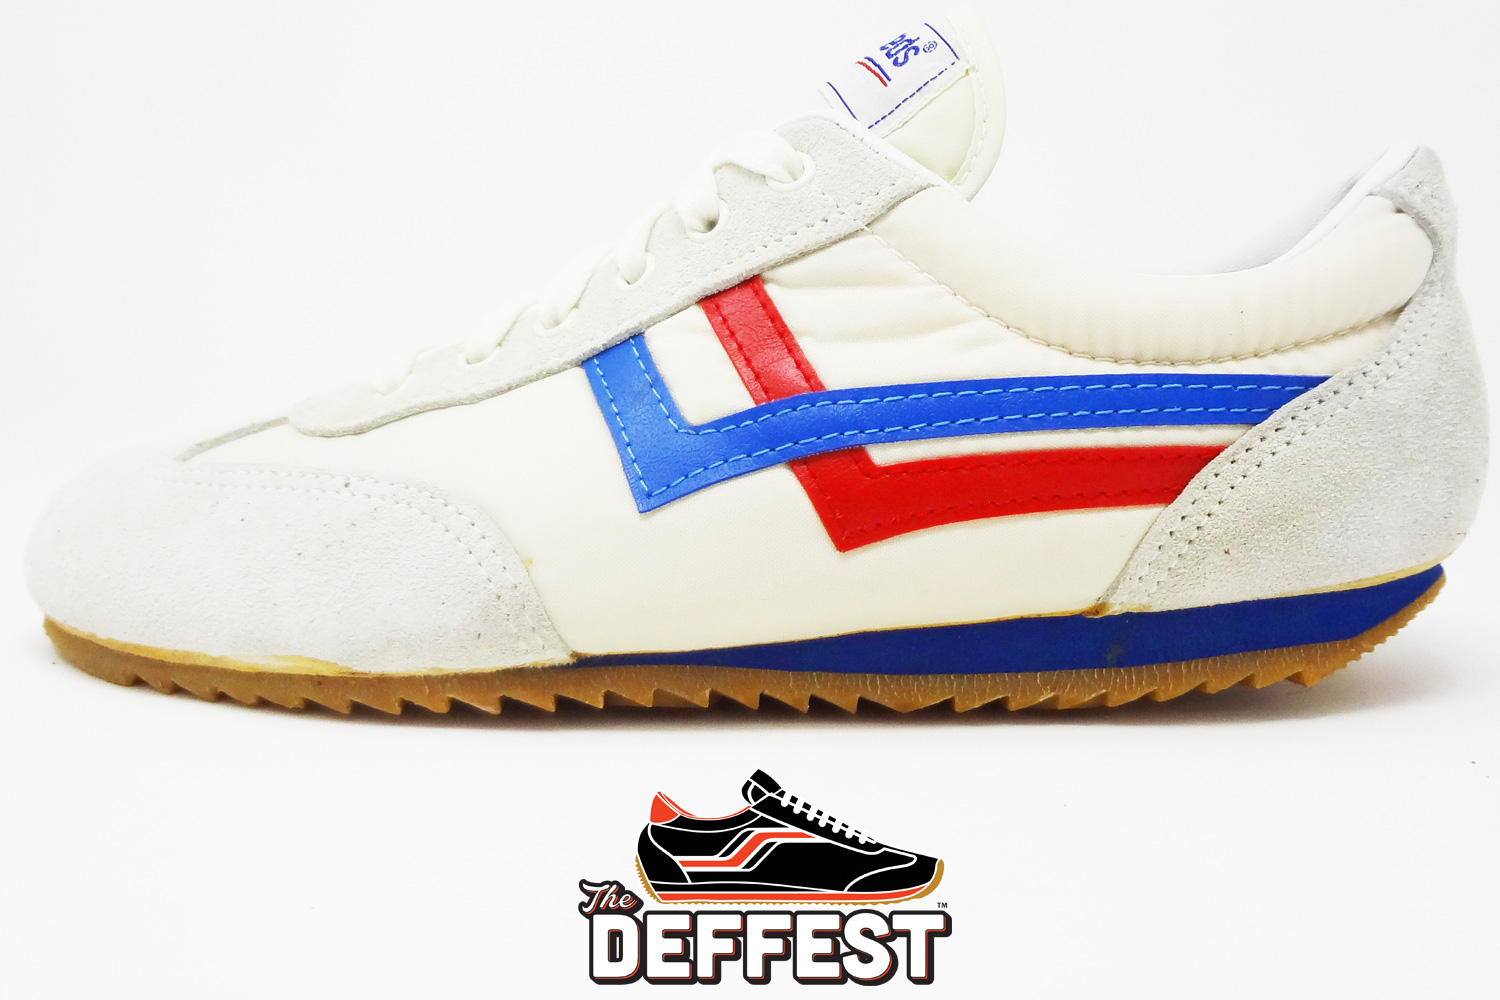 The Deffest®. A and sneaker blog. — Pro-Keds retro 80s vintage sneakers